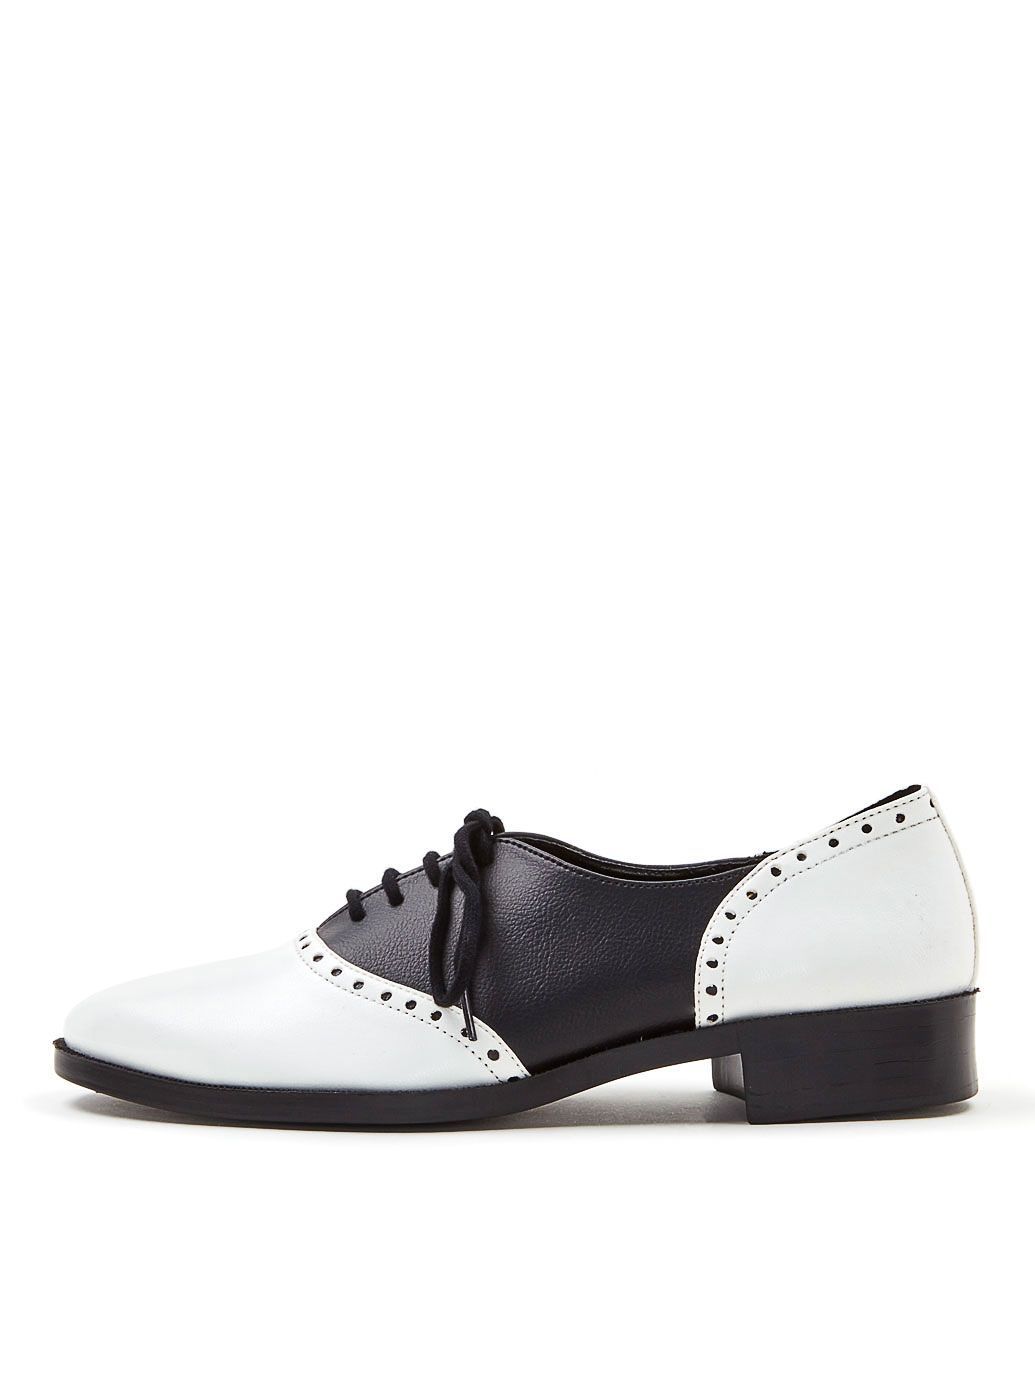 American Apparel - The new Women’s Oxford Shoe, made in the USA in...